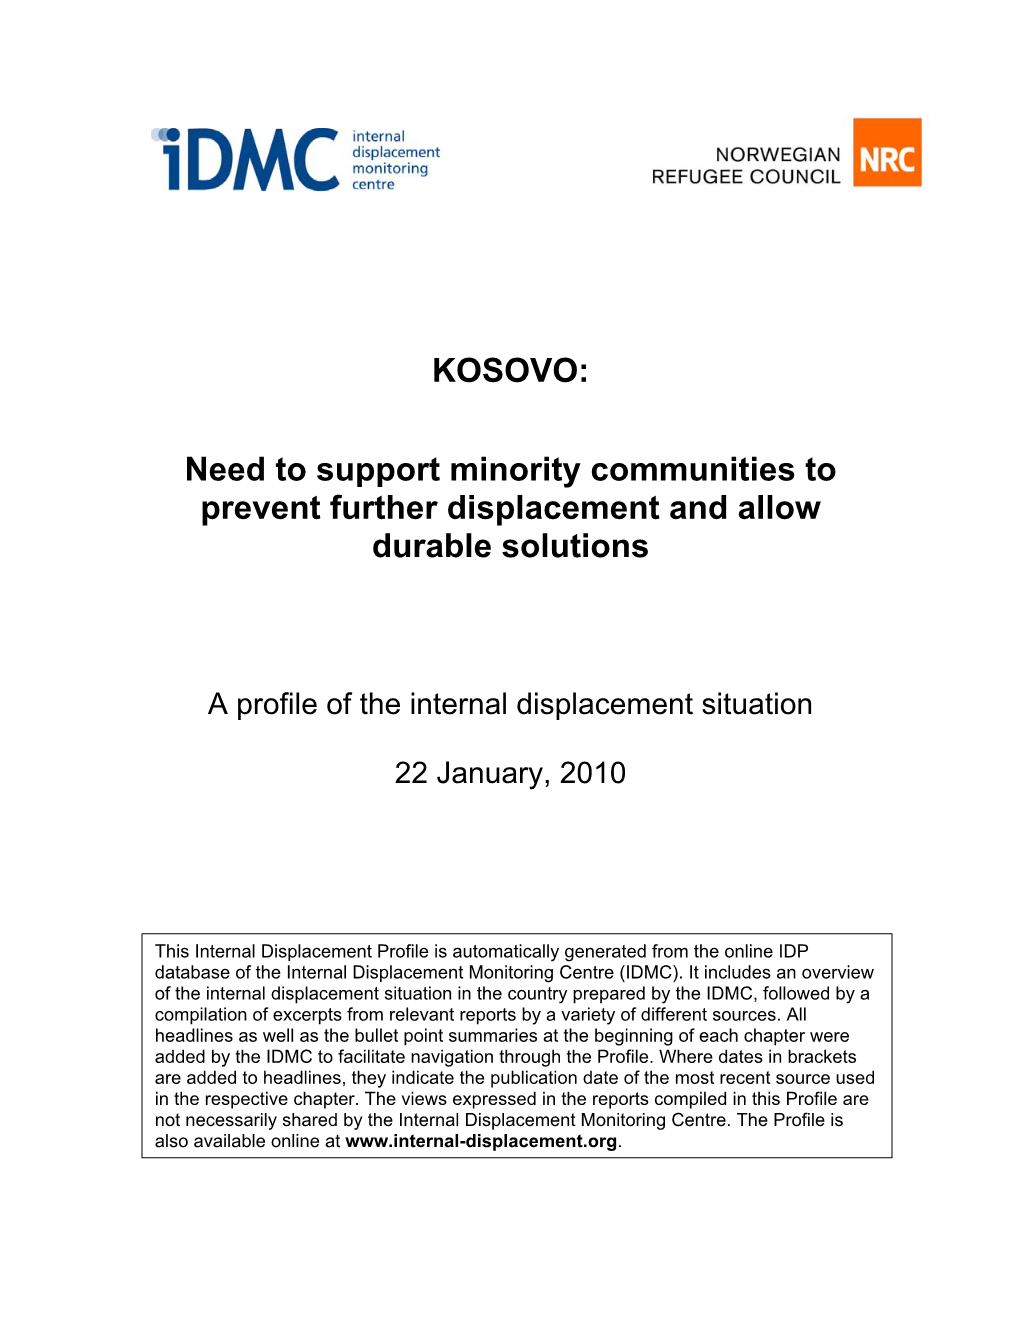 Need to Support Minority Communities to Prevent Further Displacement and Allow Durable Solutions